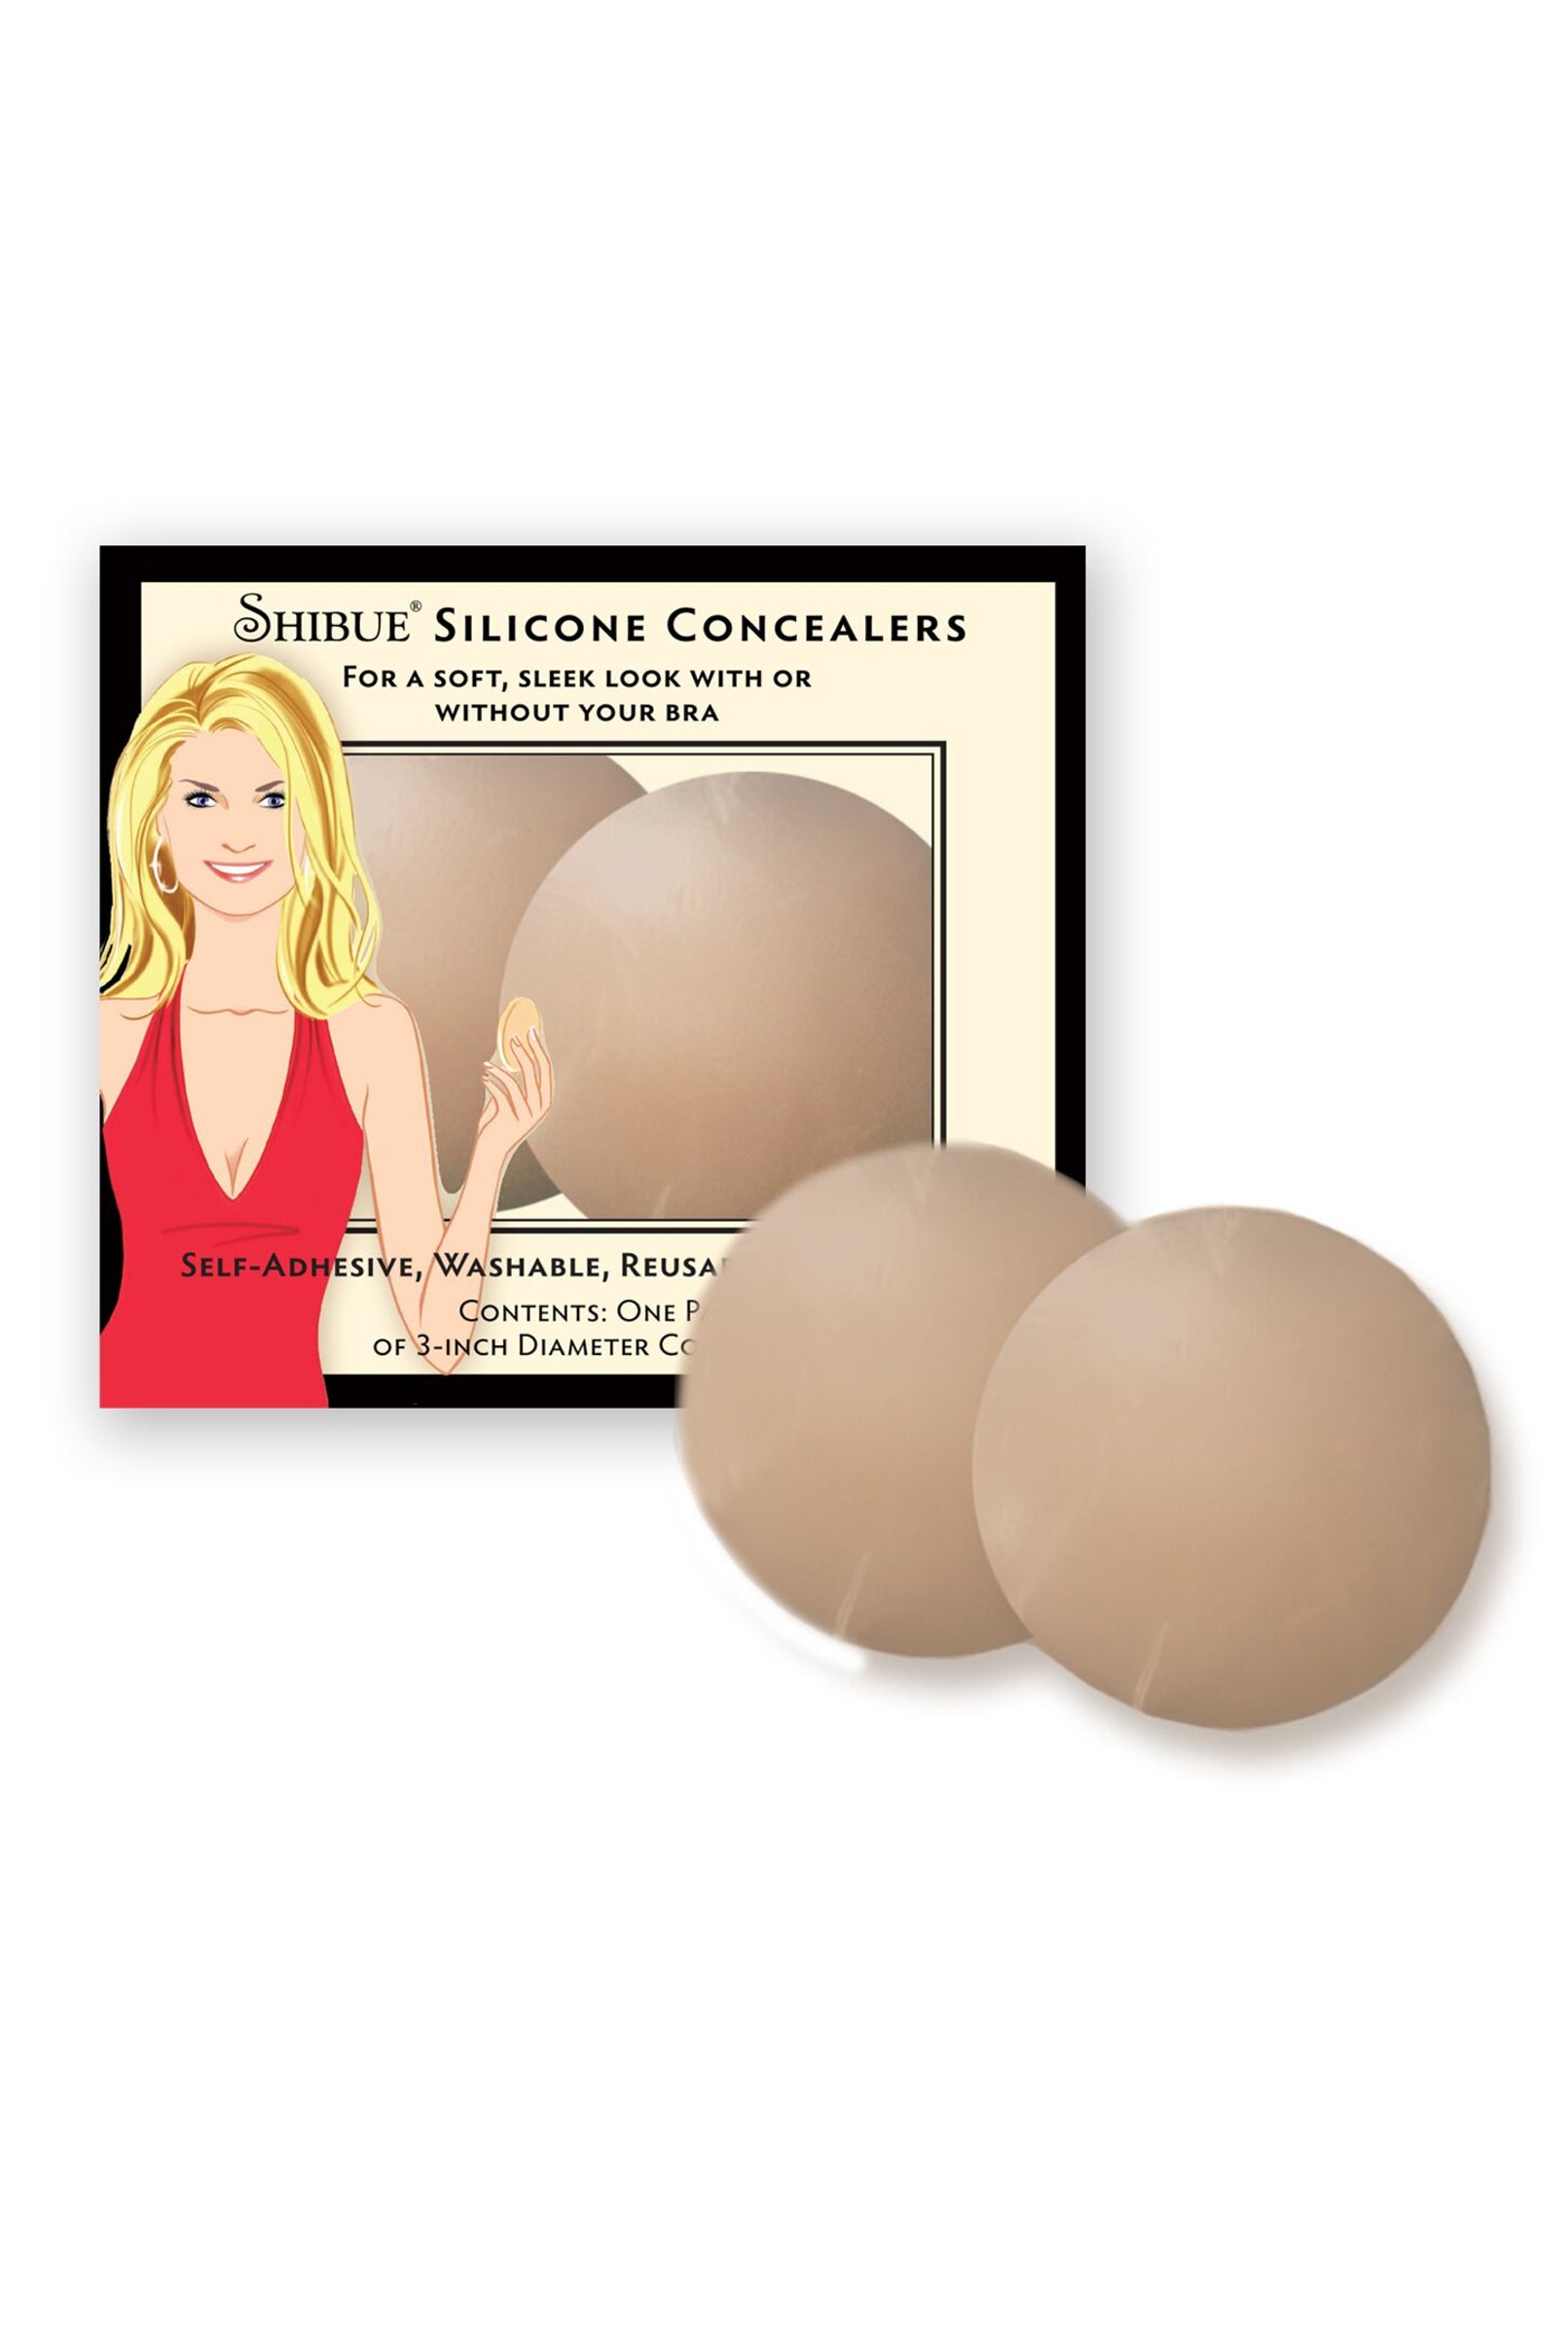 Shibue Couture Silicone Nipple Concealers freeshipping - TrousseauOfDallas